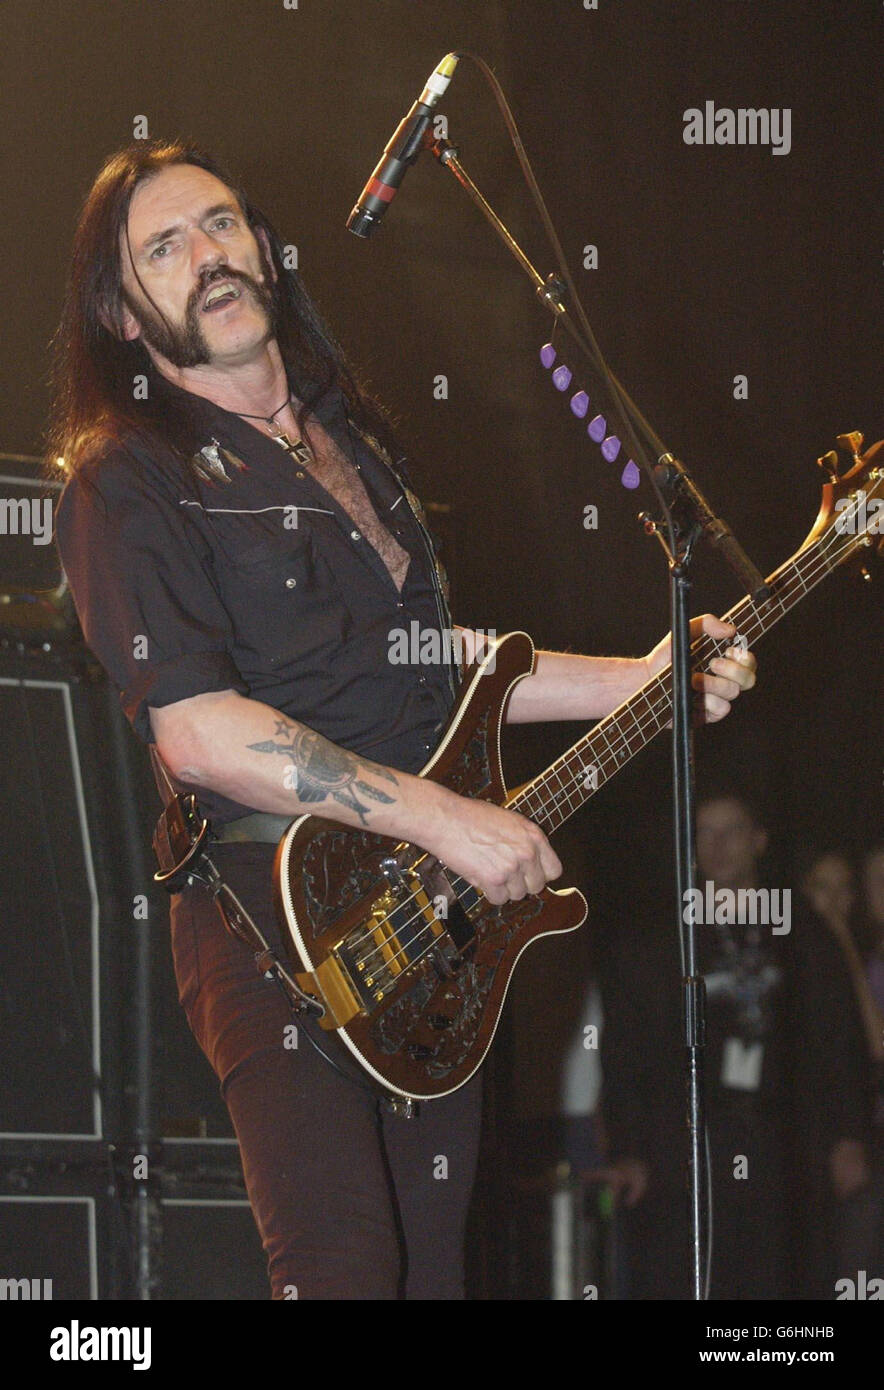 Lead singer Lemmy performs with his band Motorhead on stage at the Carling Hammersmith Apollo in west London. Stock Photo